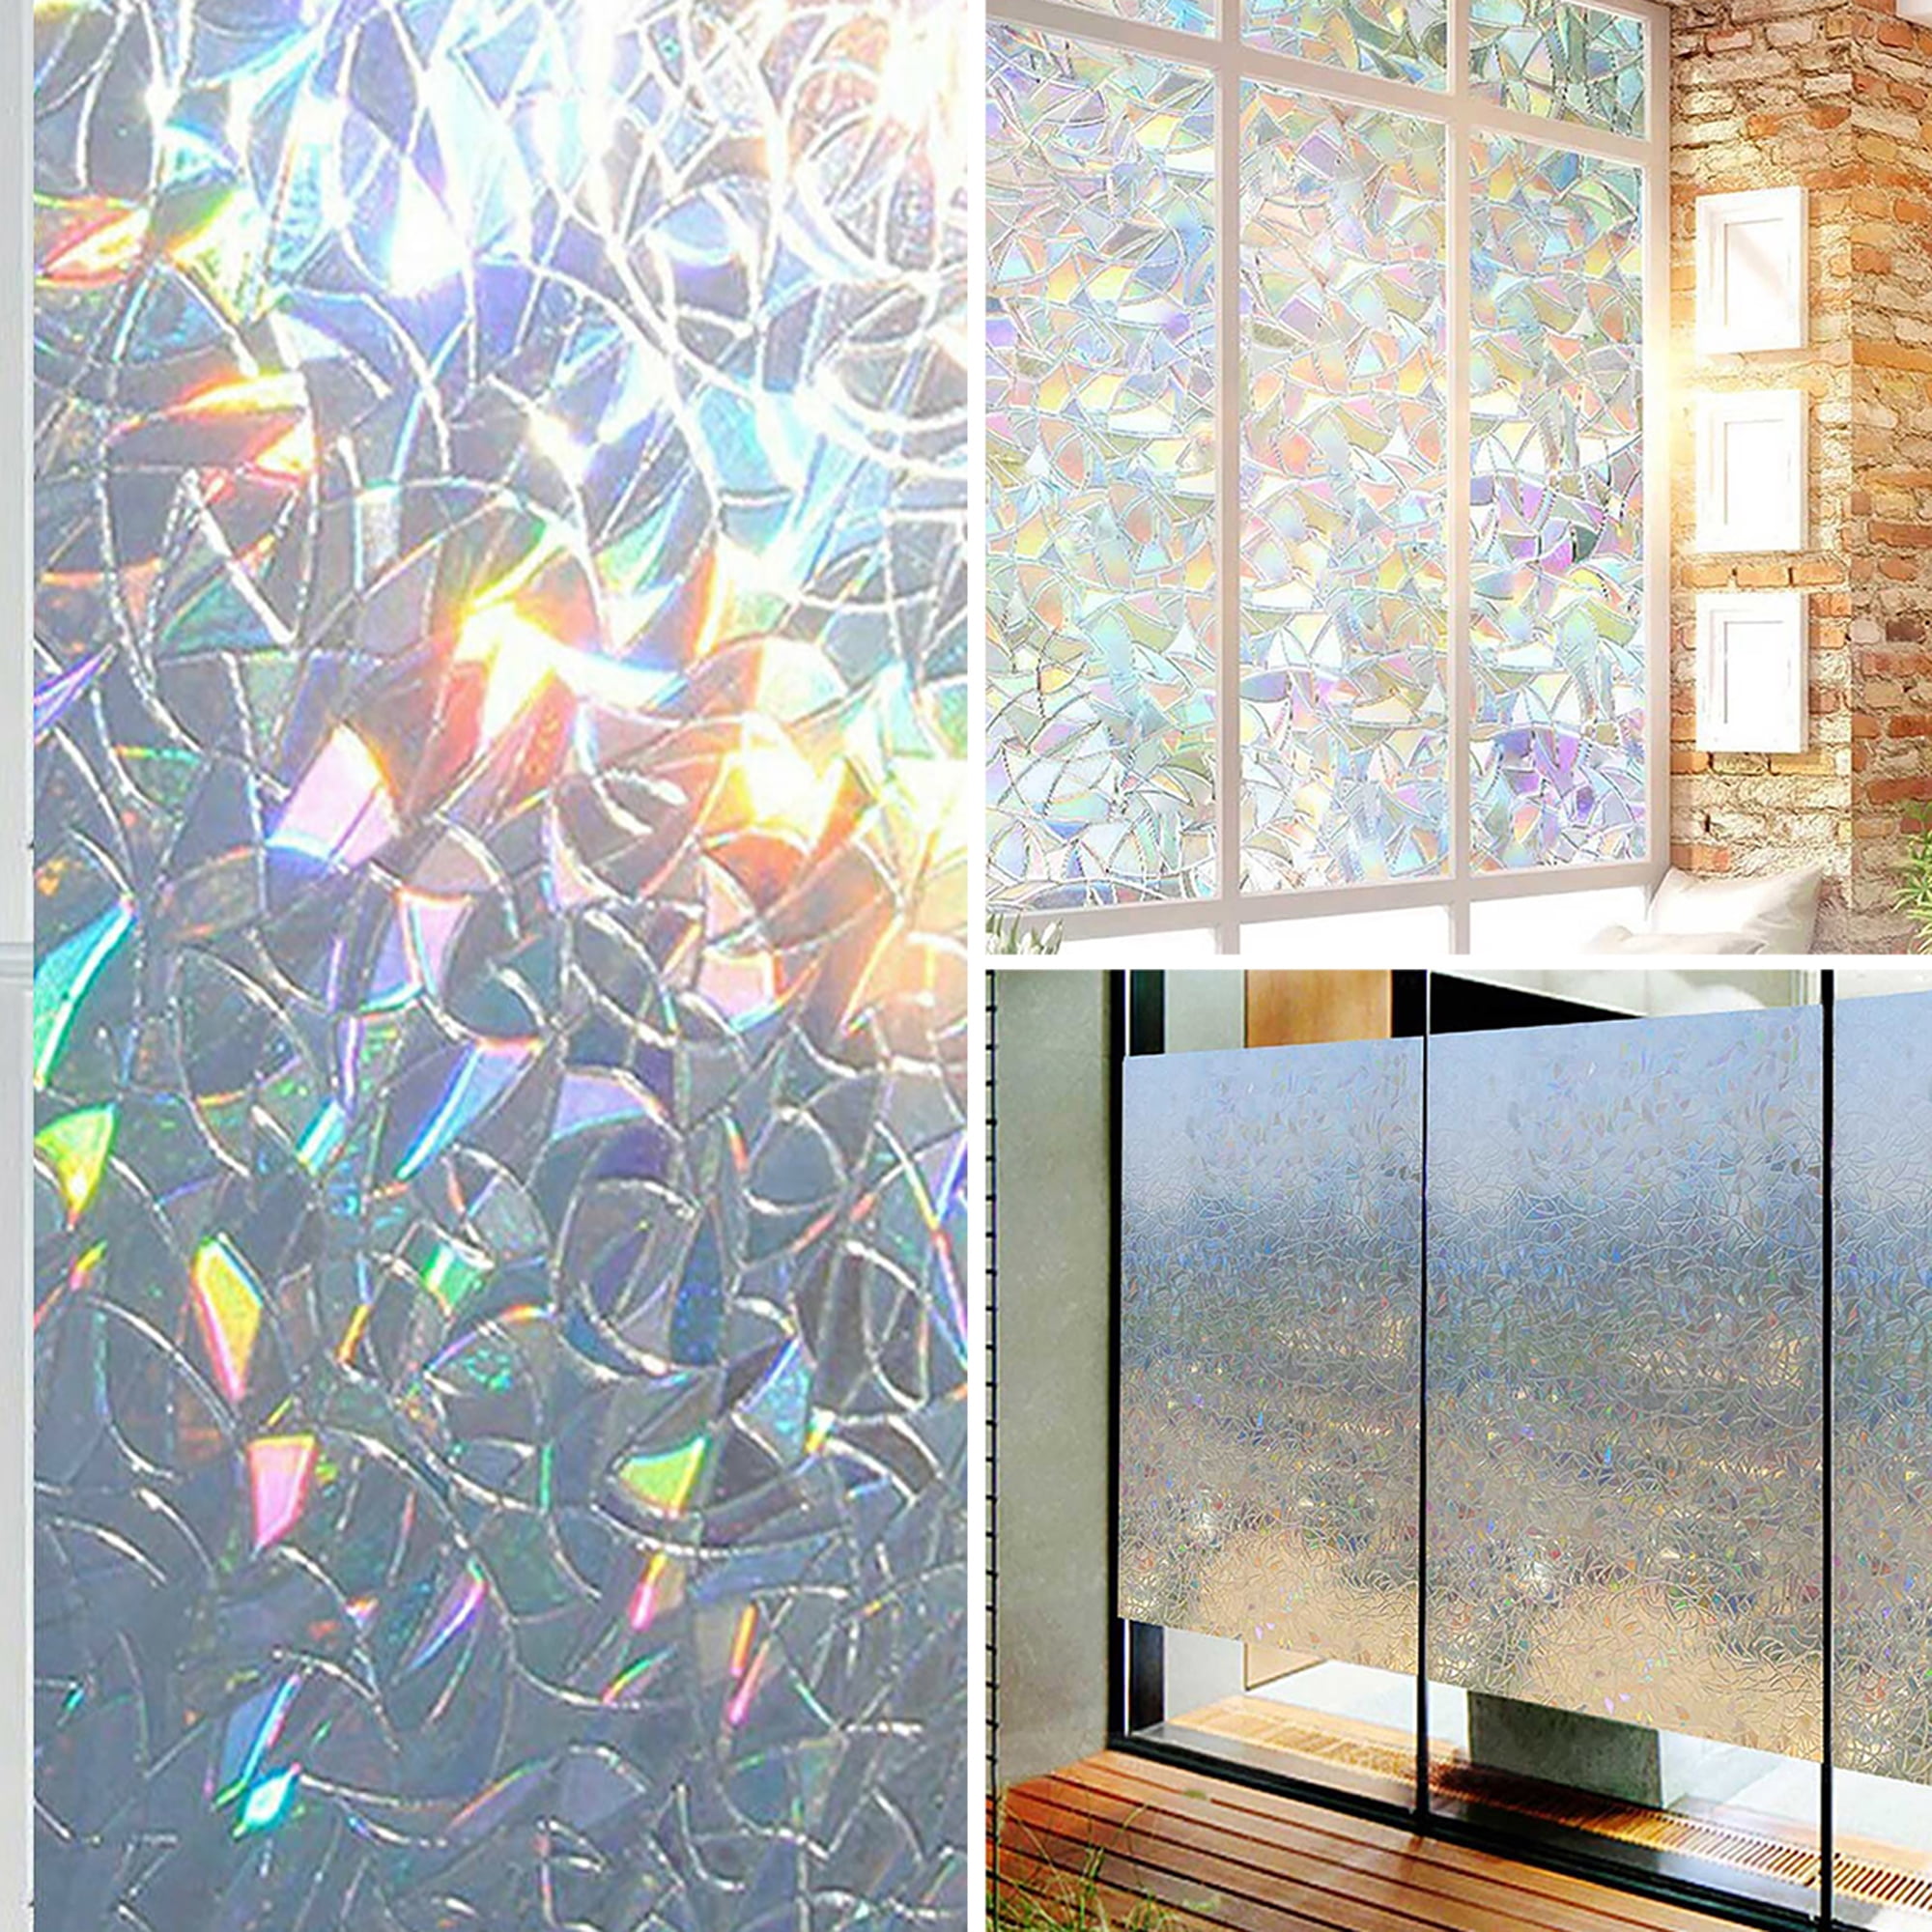 Details about   3D Wall Stickers Glass Decals Decorative Films Rainbow Privacy Protection H